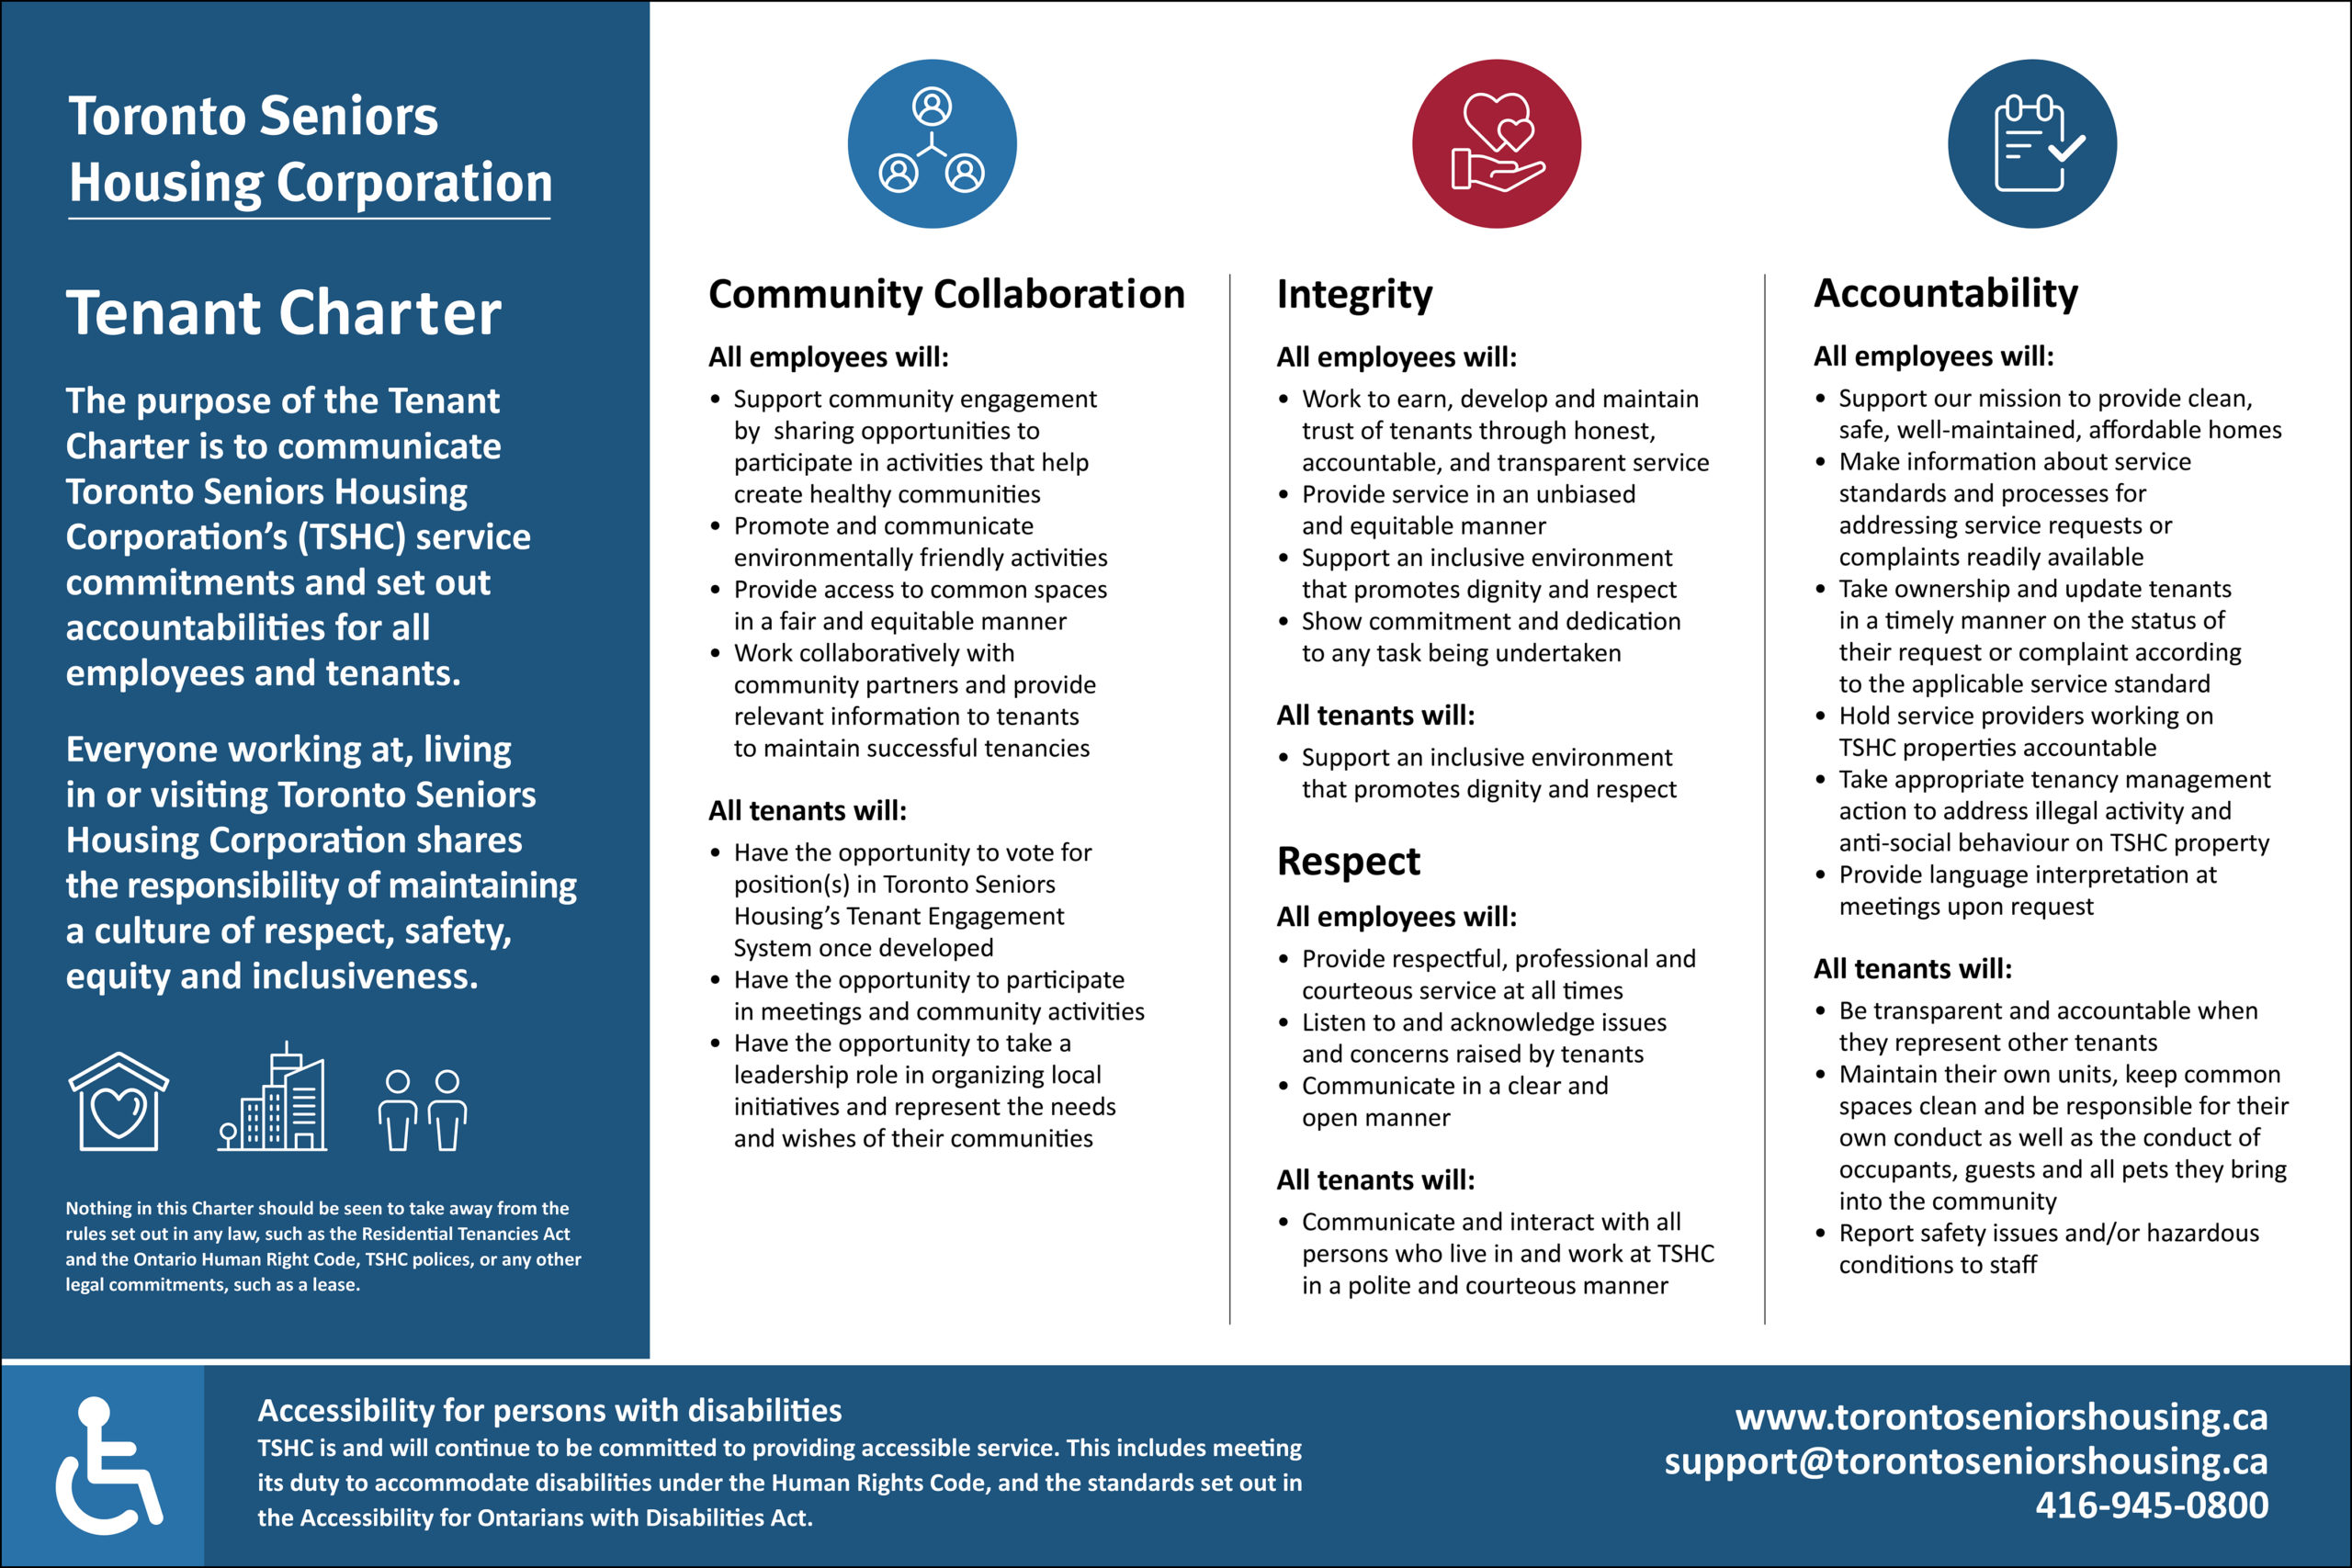 A graphic of the Toronto Seniors Housing tenant charter. The headings are Community Collaboration, Integrity, Respect and Accountability. The purpose of the tenant charter is to communicate Toronto Seniors Housing Corporation's service commitments and set out accountabilities for all employees and tenants.